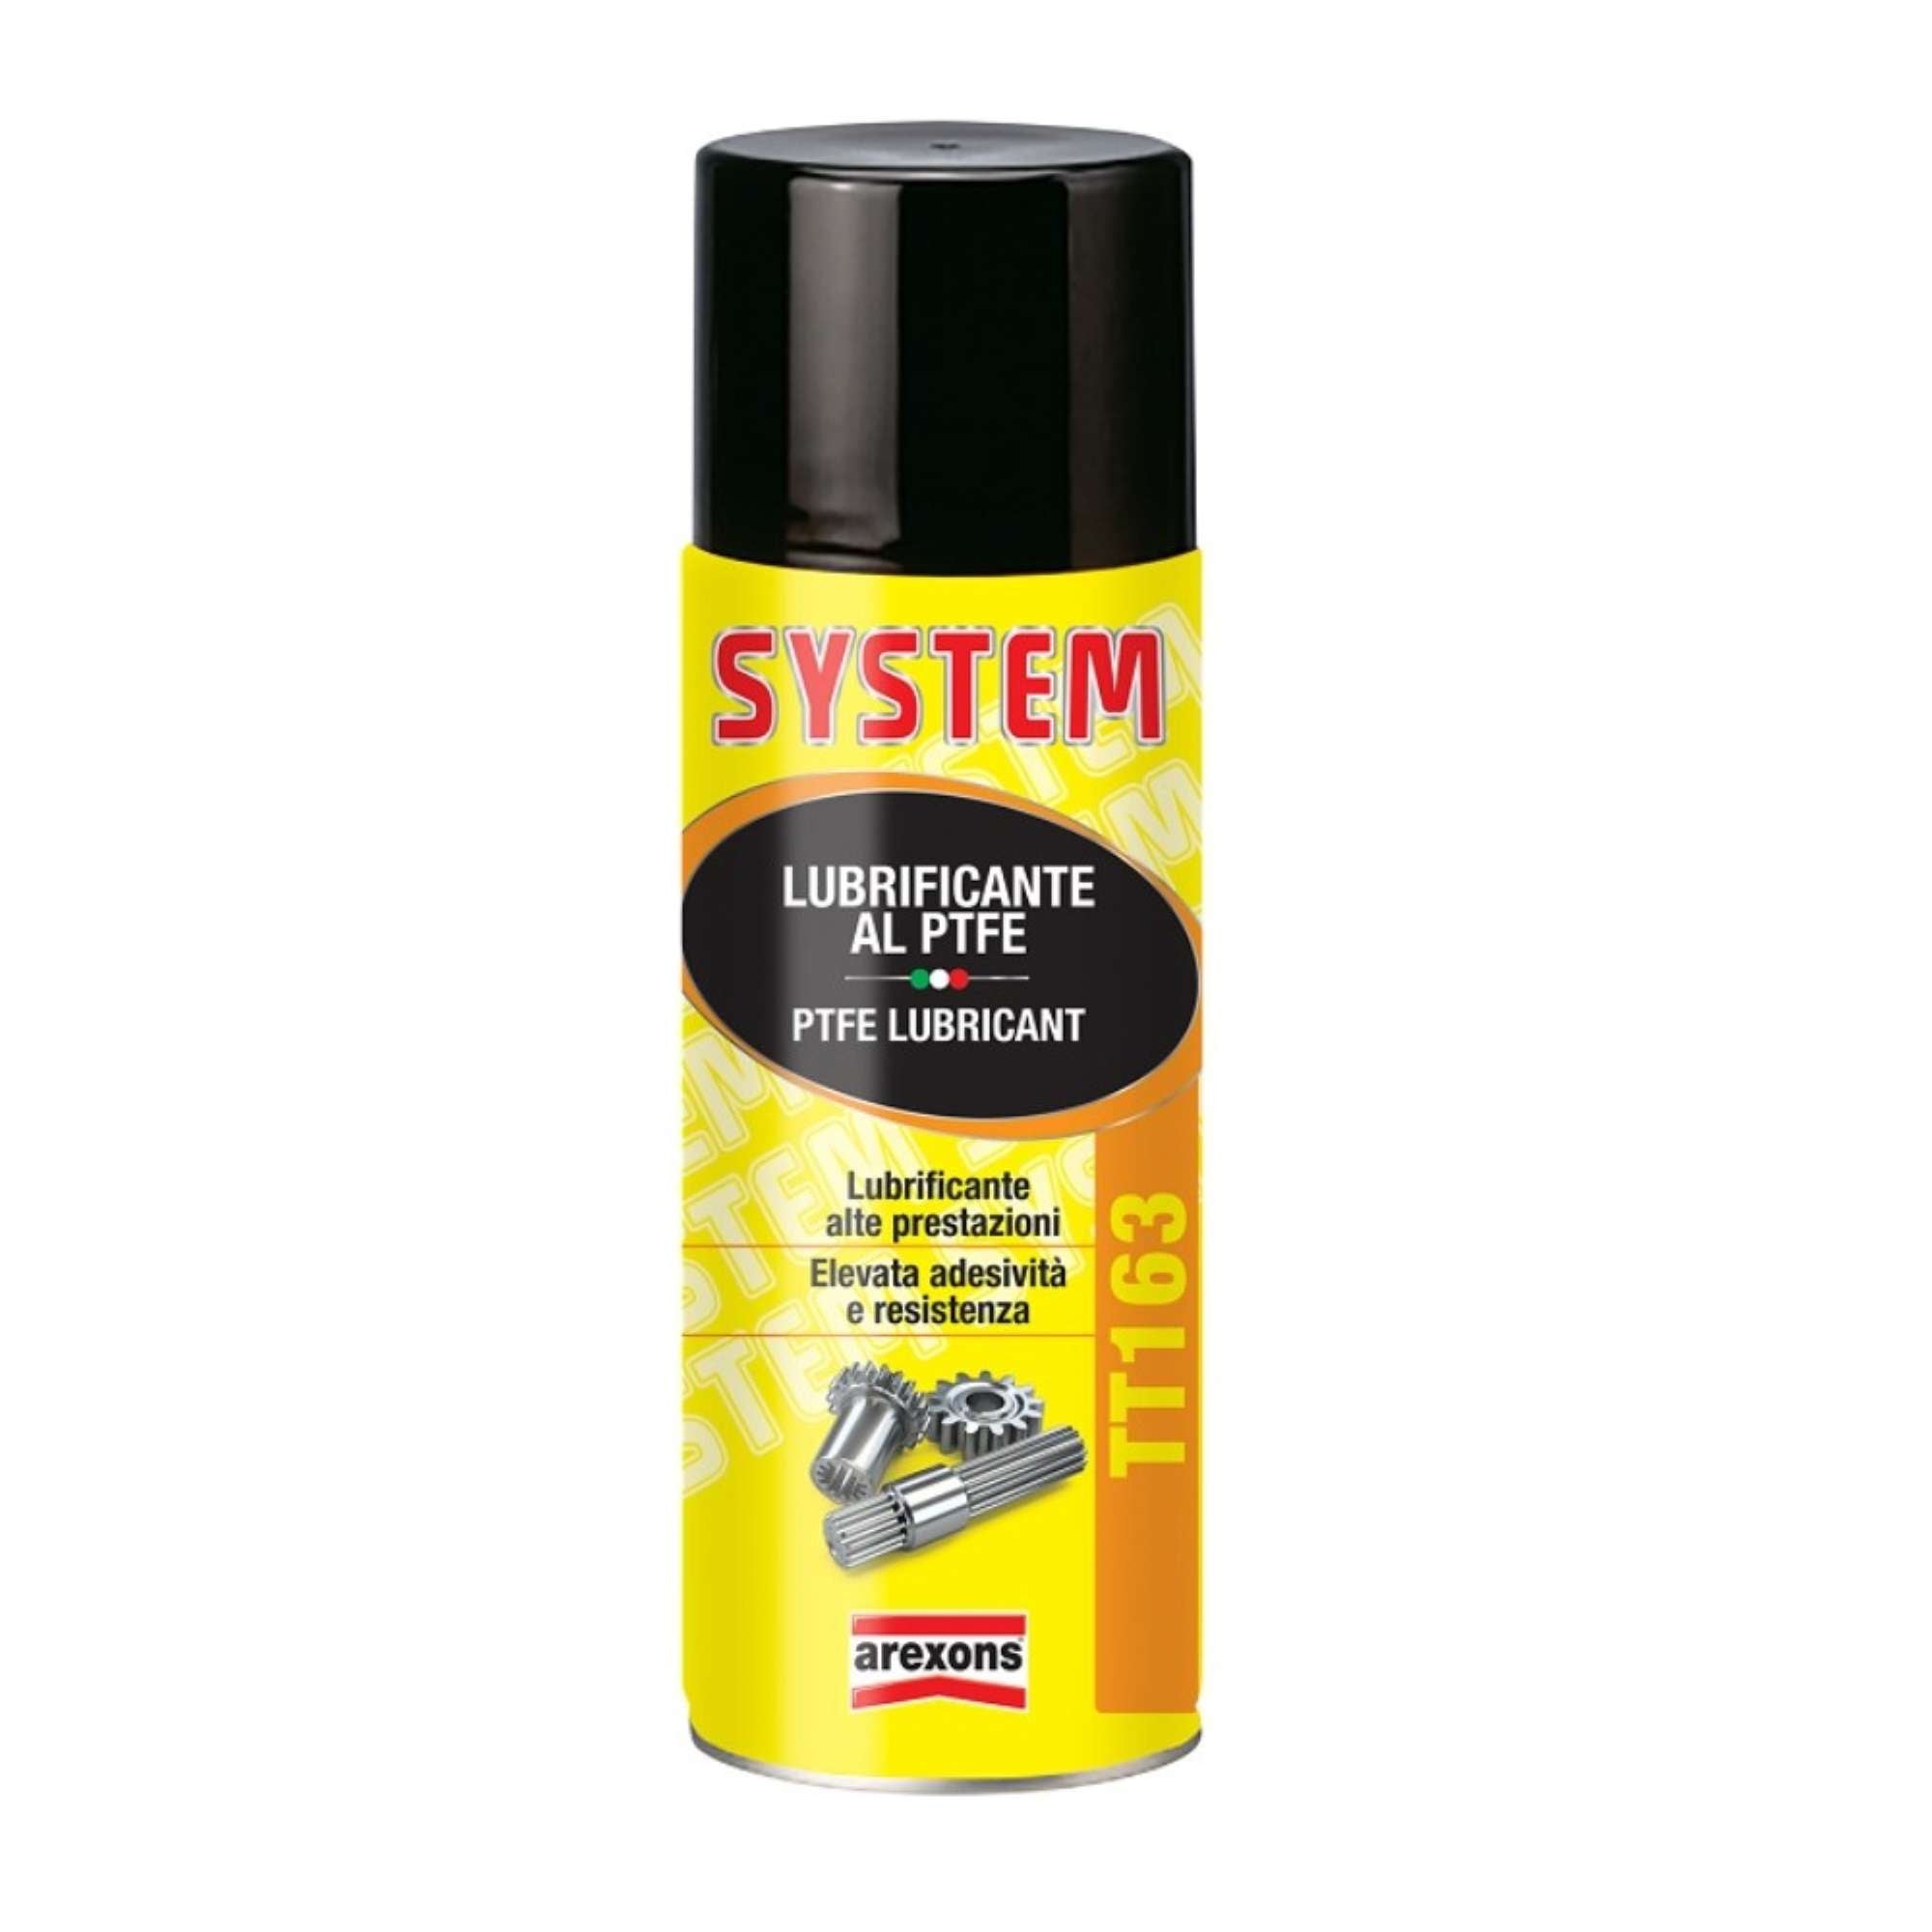 System Tt163 Ptfe Lubricant - Arexons 4163